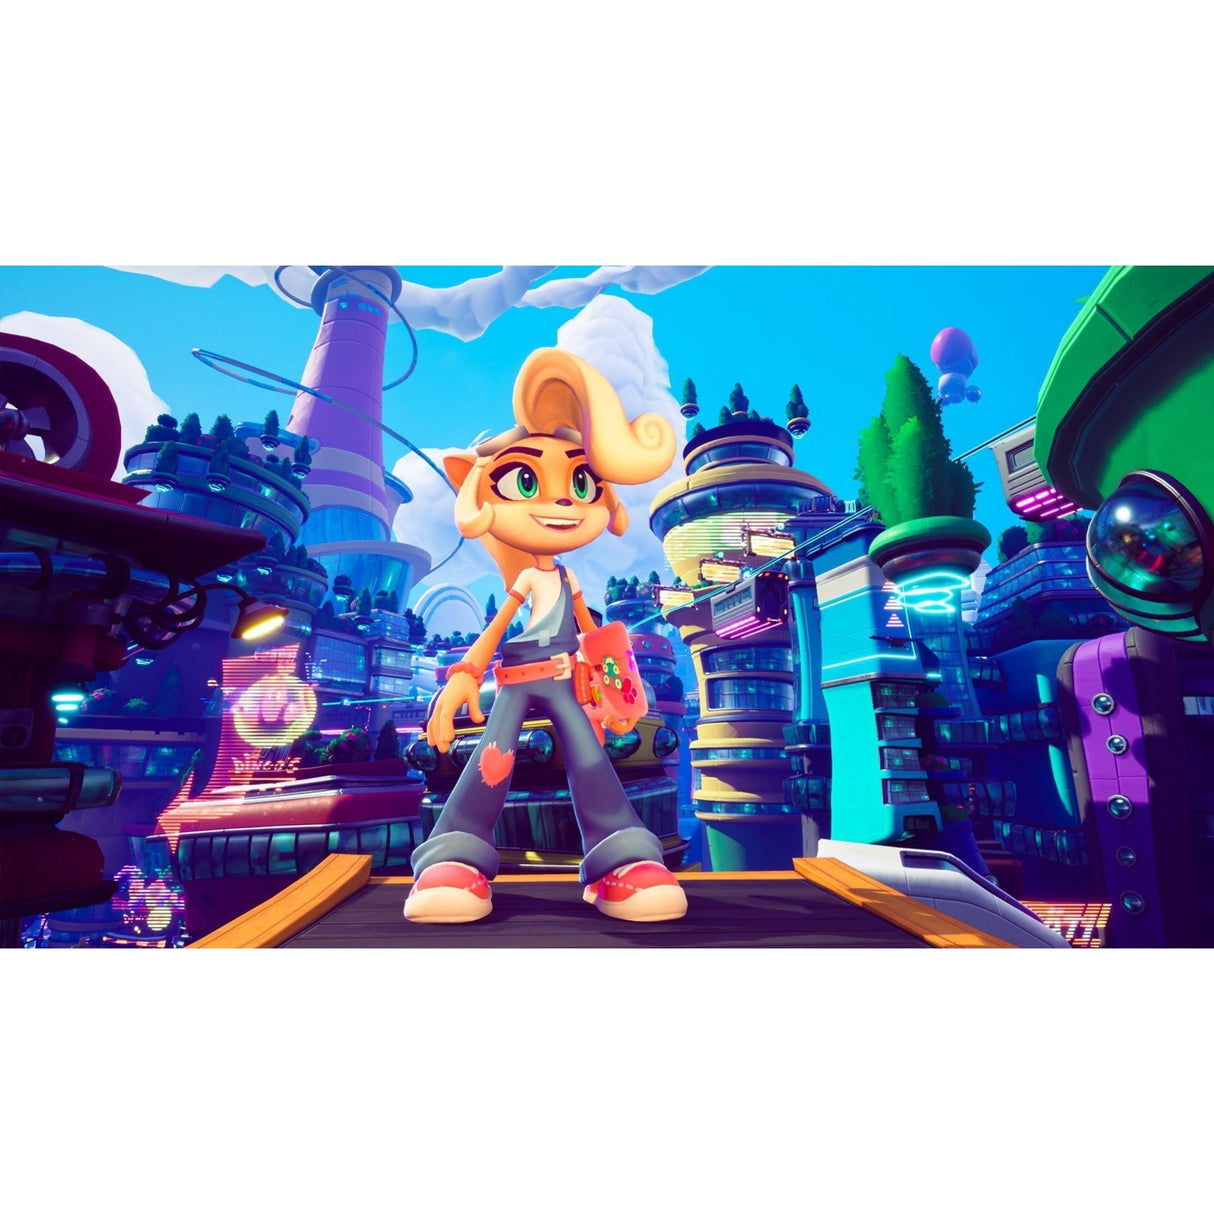 Crash Bandicoot 4 It’s About Time For PlayStation 4"Region 2" - Level UpLevel UpPlaystation Video Games5030917291029